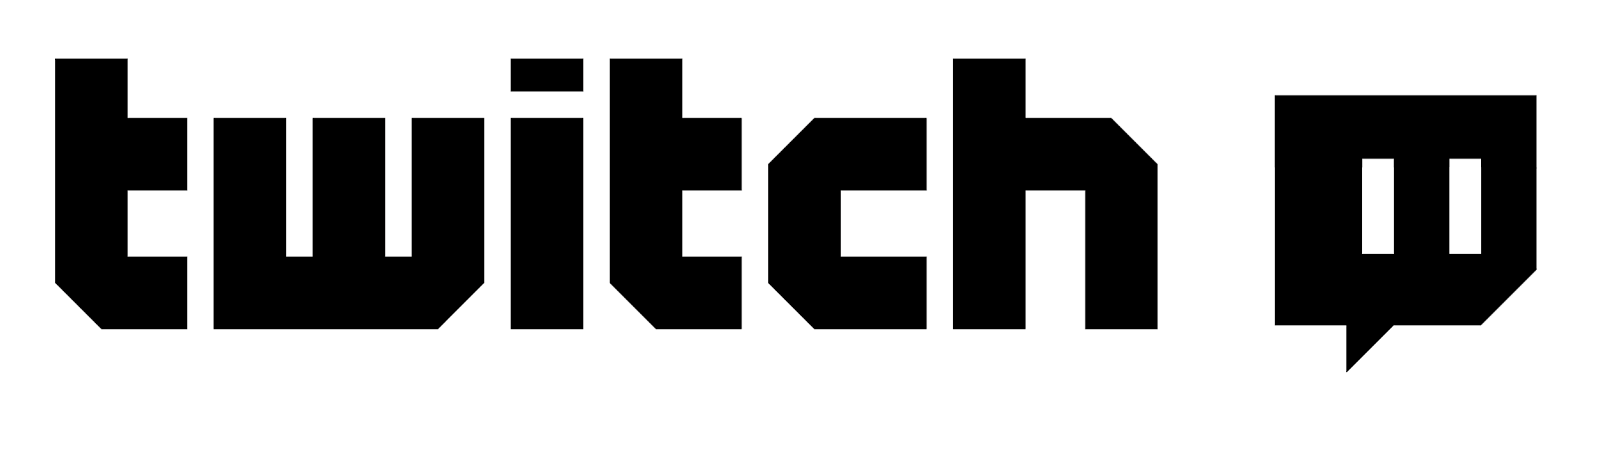 Twitch logo PNG images free download